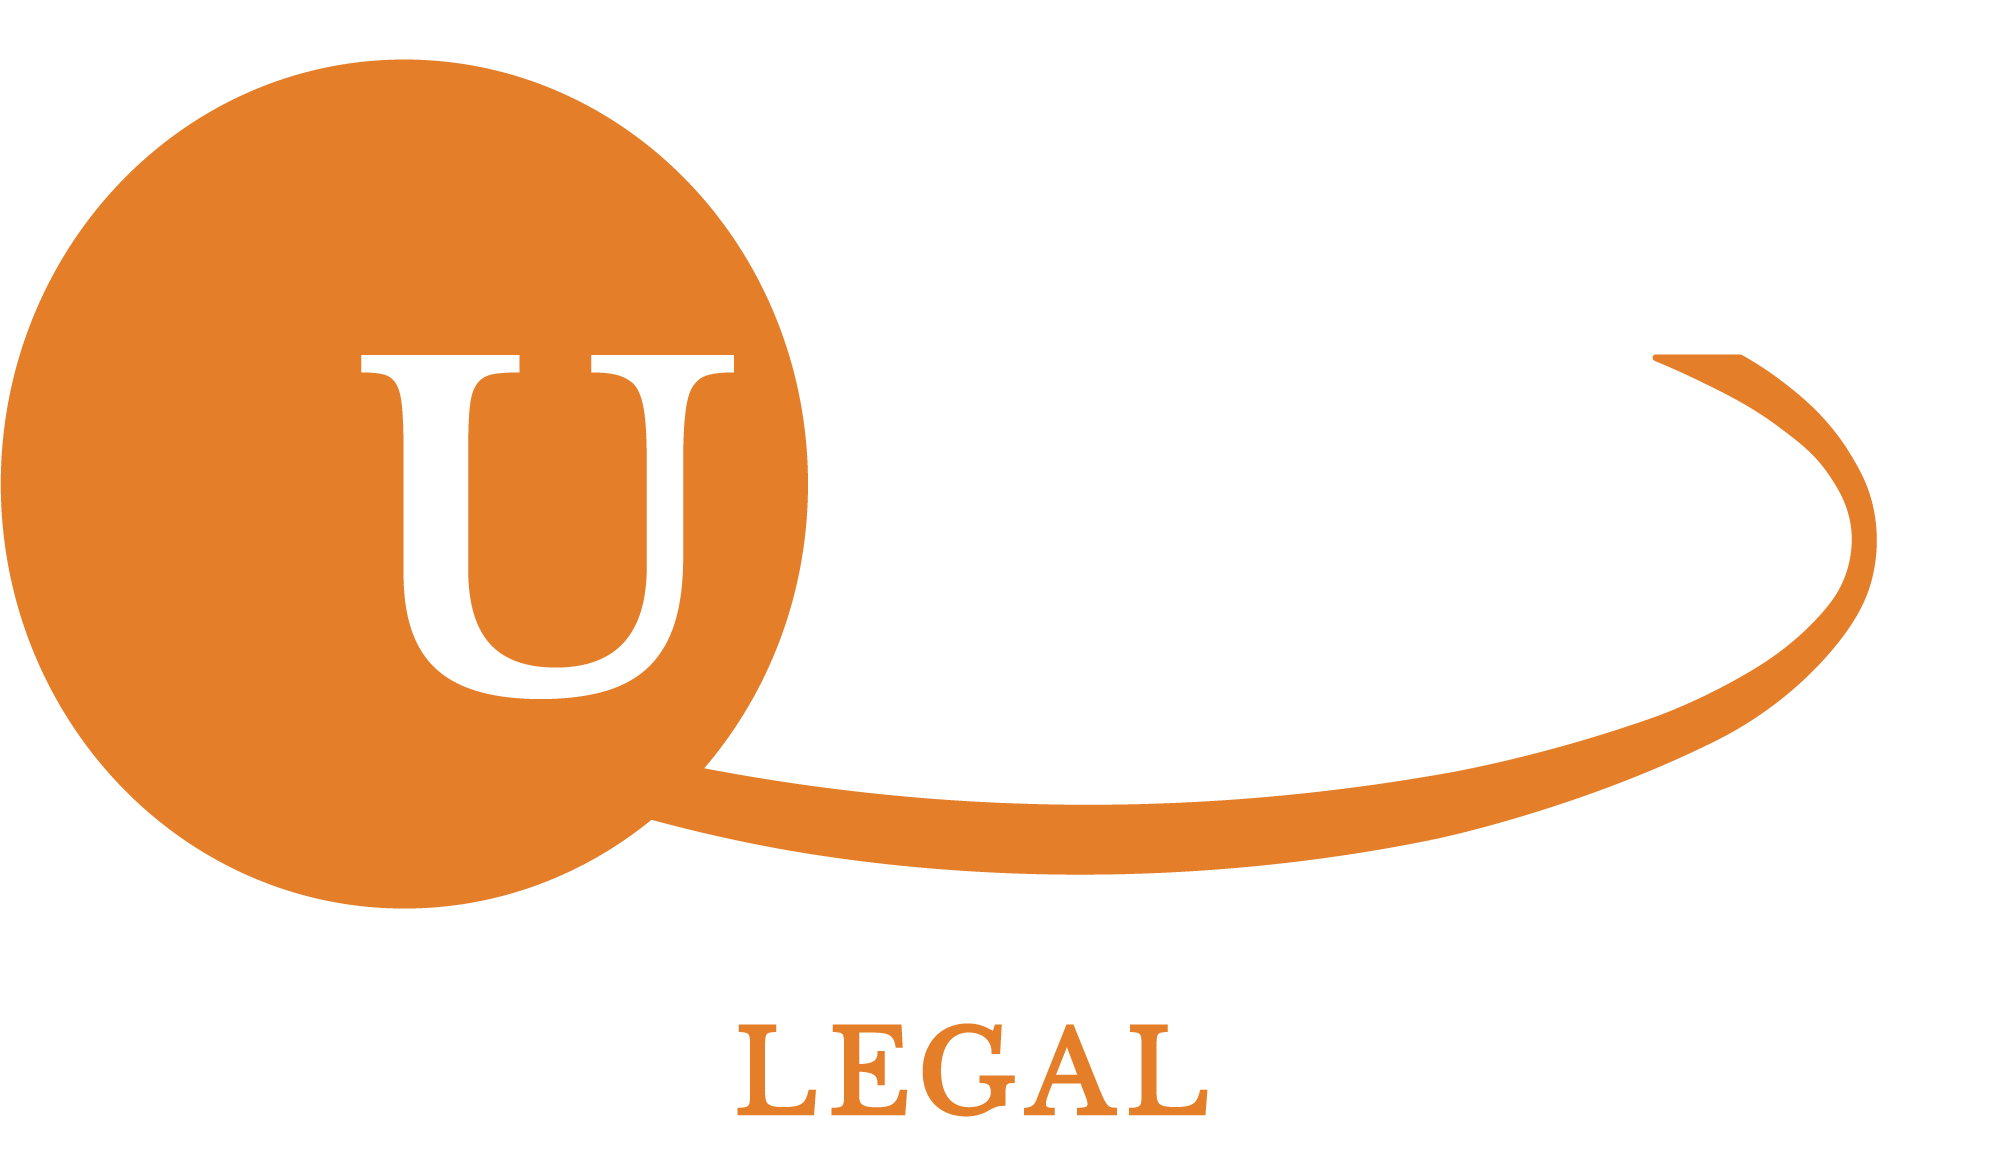 United Legal Network